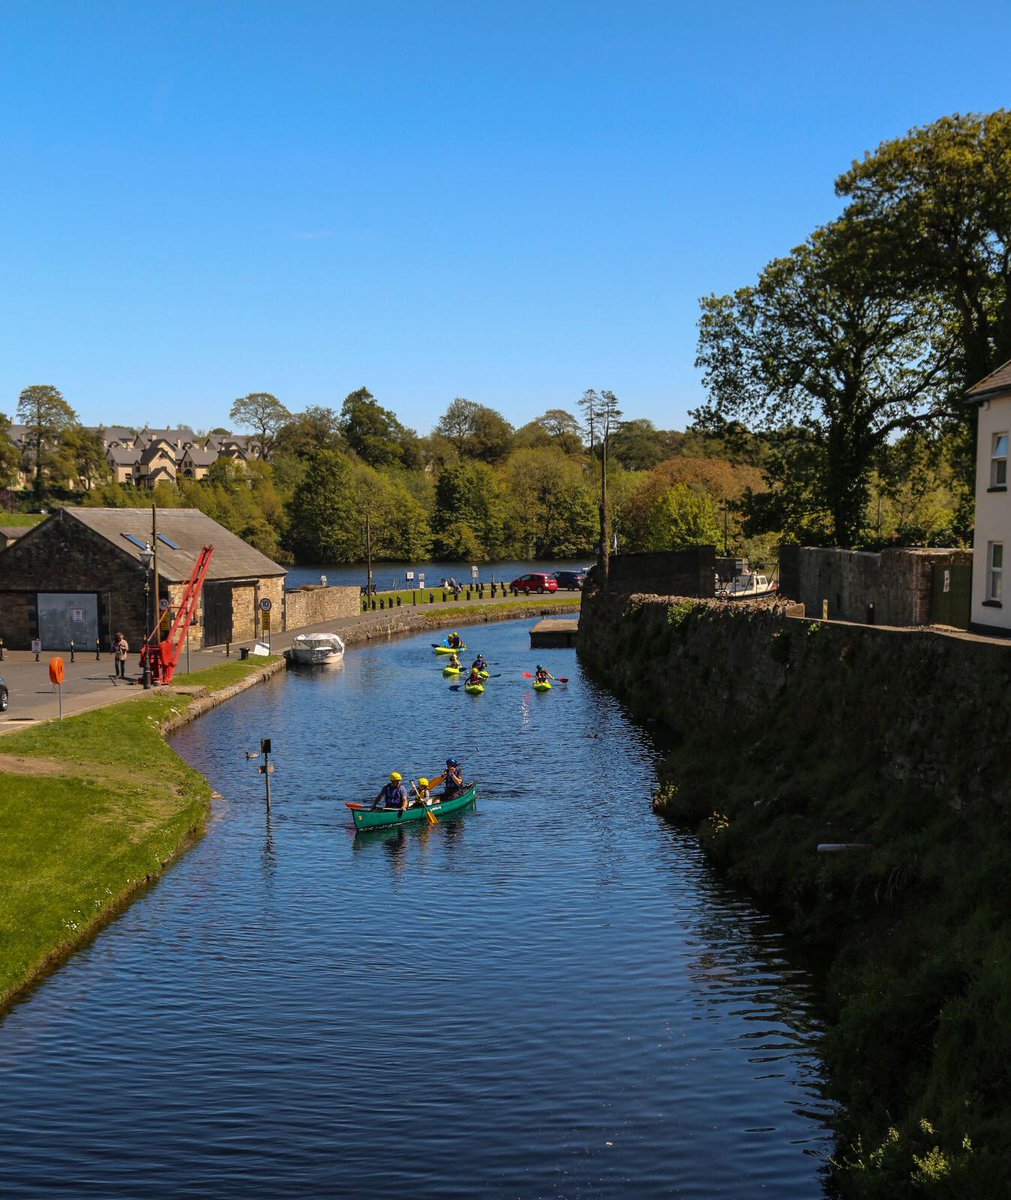 The old canal at Killaloe originally had 3 locks, 2 of which were submerged when Ardnacrusha was built. A canal was necessary at Killaloe to carry traffic past the rapids on the Shannon. Take a visit the next time you are with us & discover more history of our wonderful town.